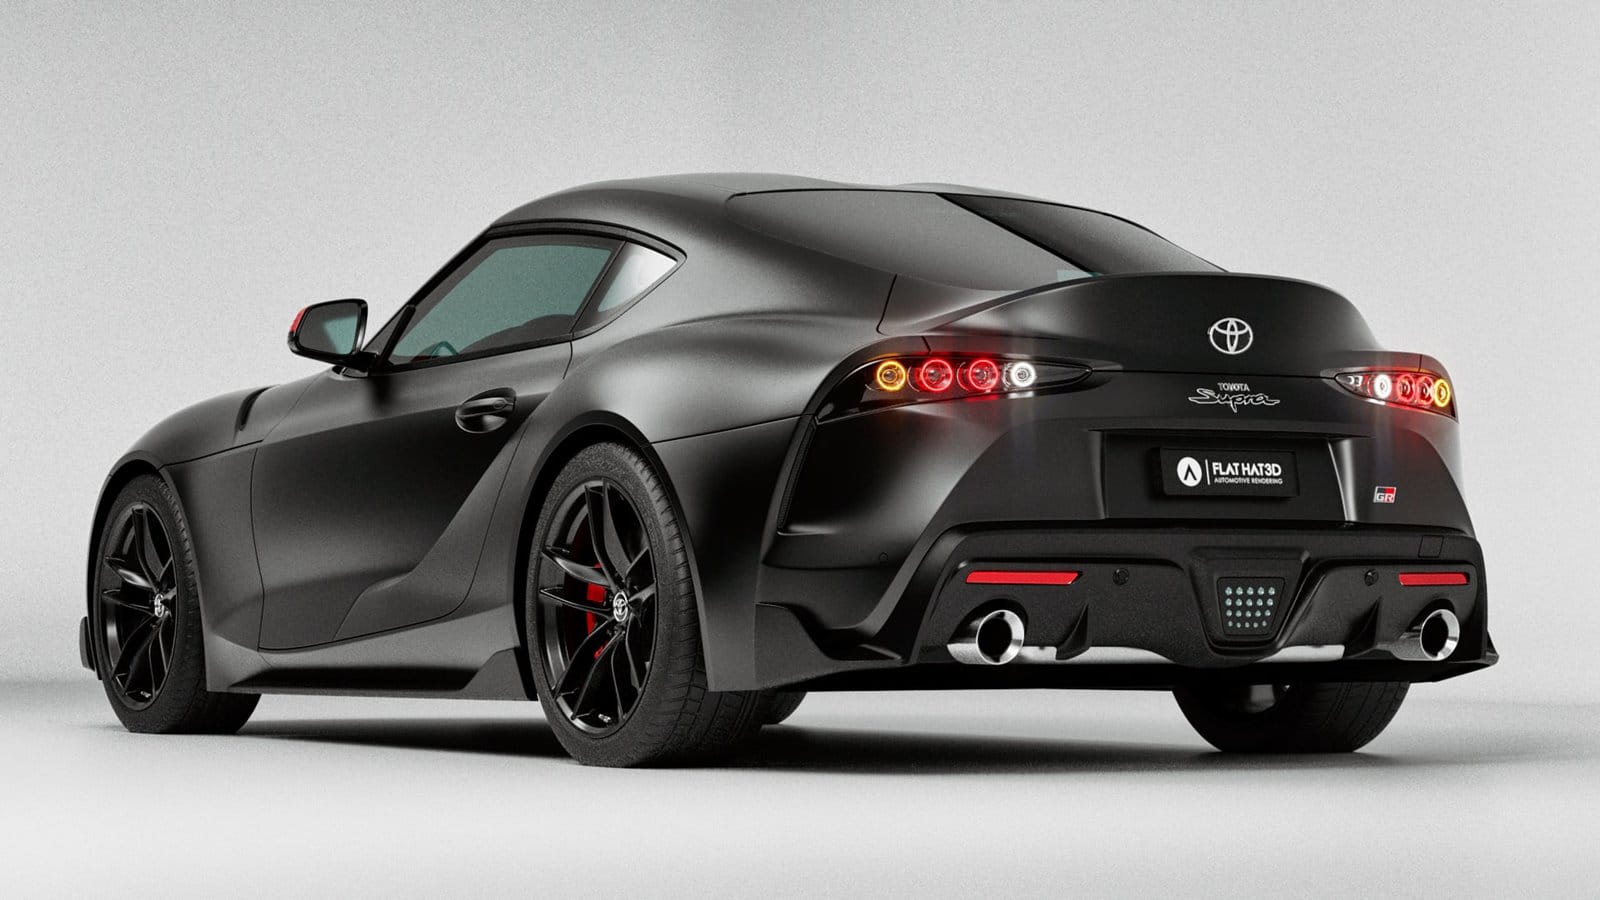 With these headlights the Toyota Supra looks like what it was ...